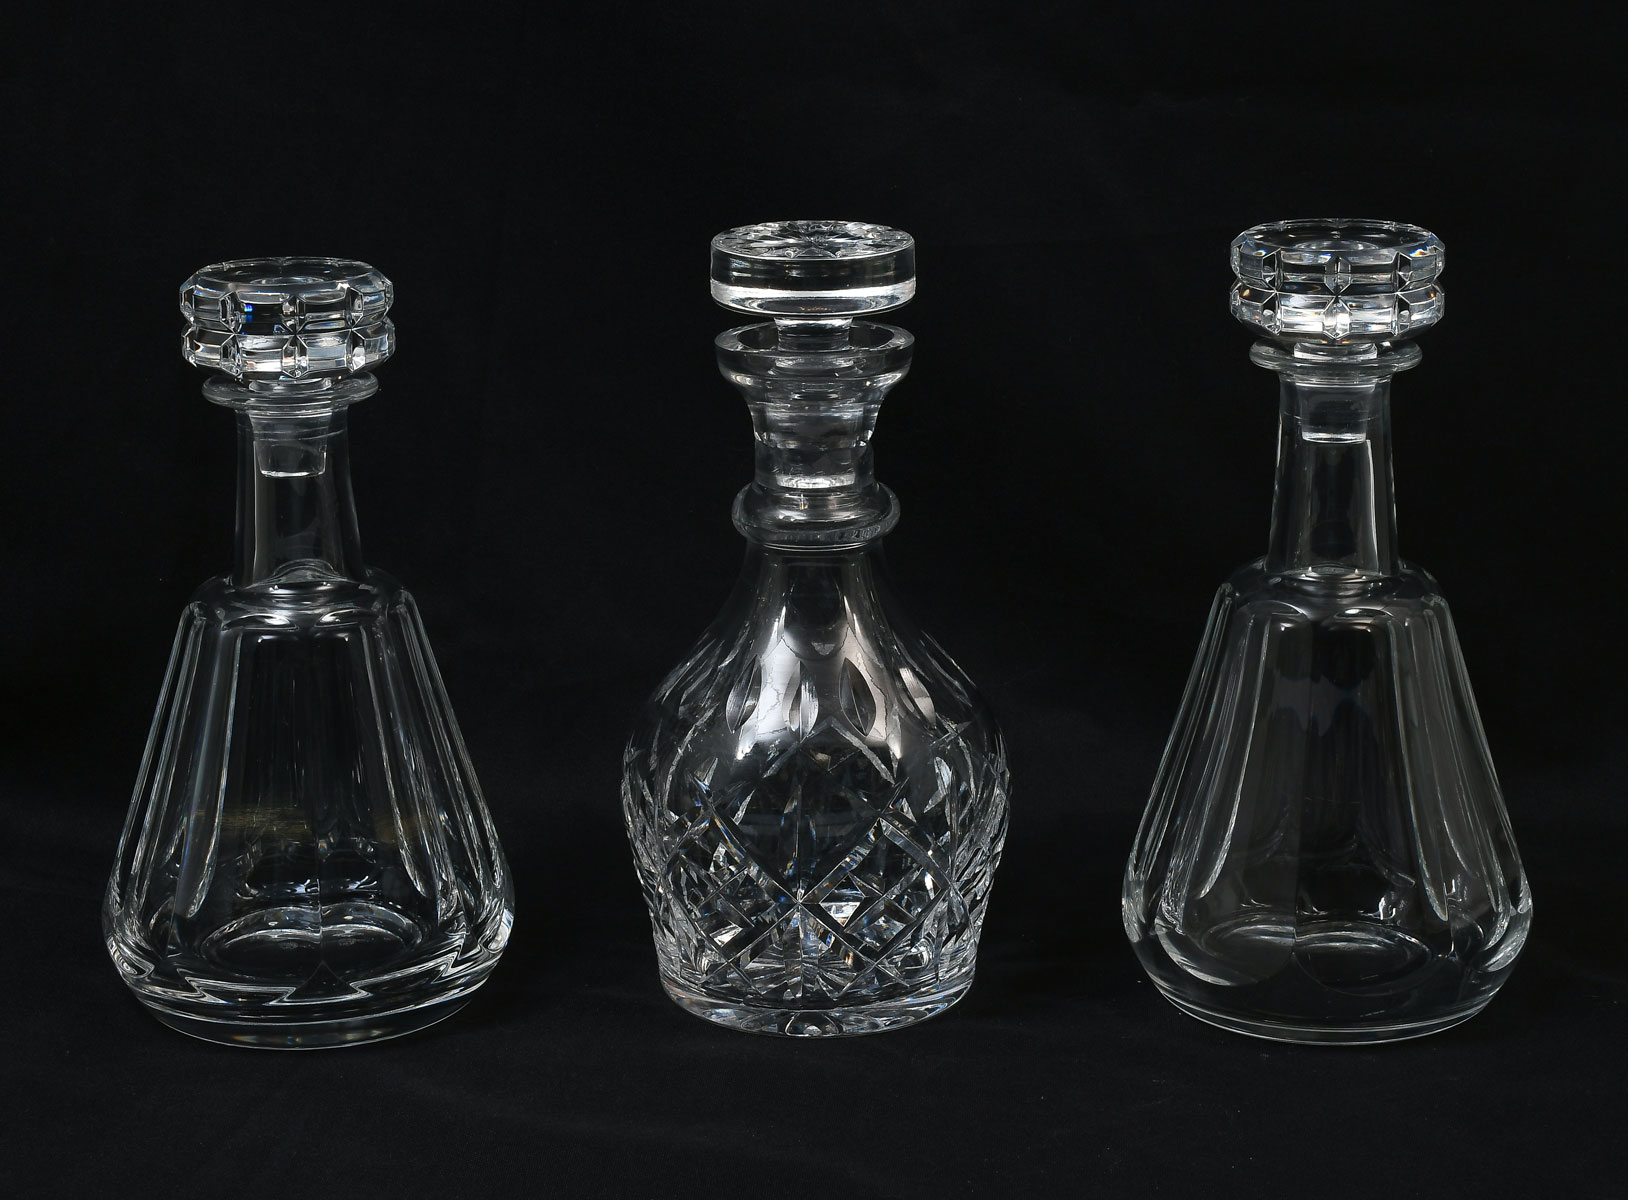 3 PC. BACCARAT & WATERFORD DECANTERS: